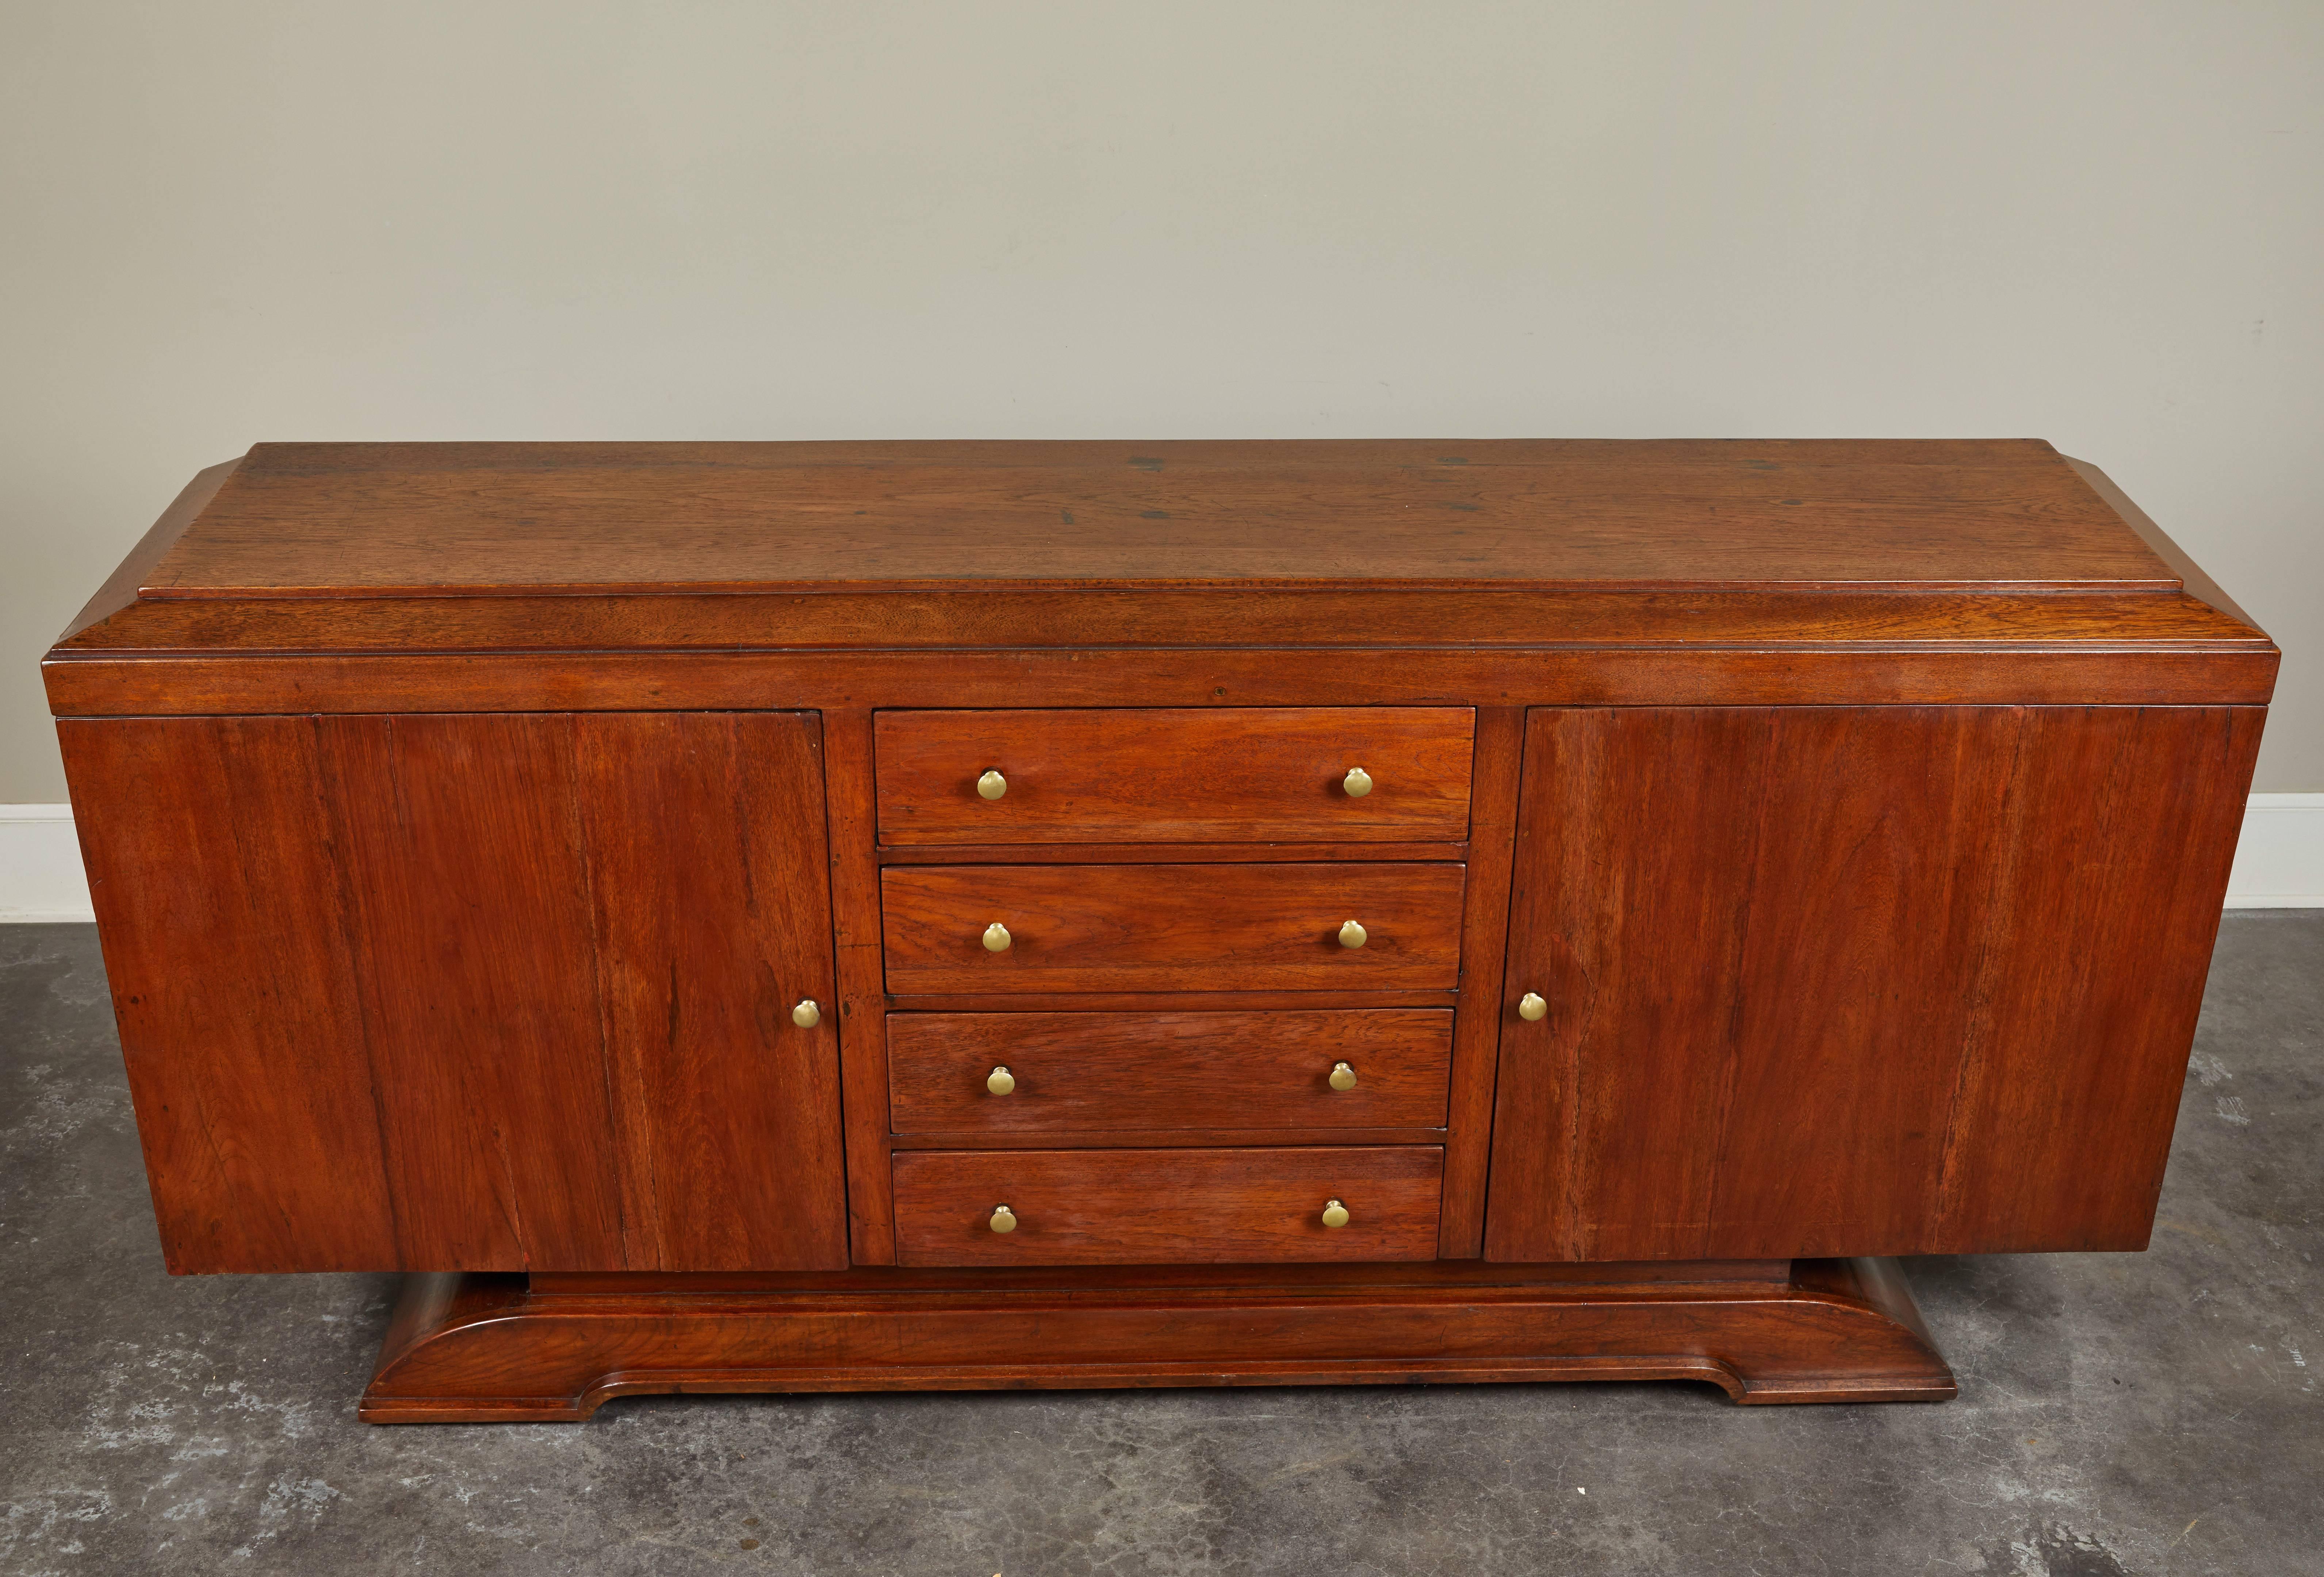 An early 20th century colonial Art Deco style rosewood sideboard. Four center drawers and two large hinge doors with single shelves. Larger scale, perfect for dining room storage, entryway organization or secondary storage in a bedroom.